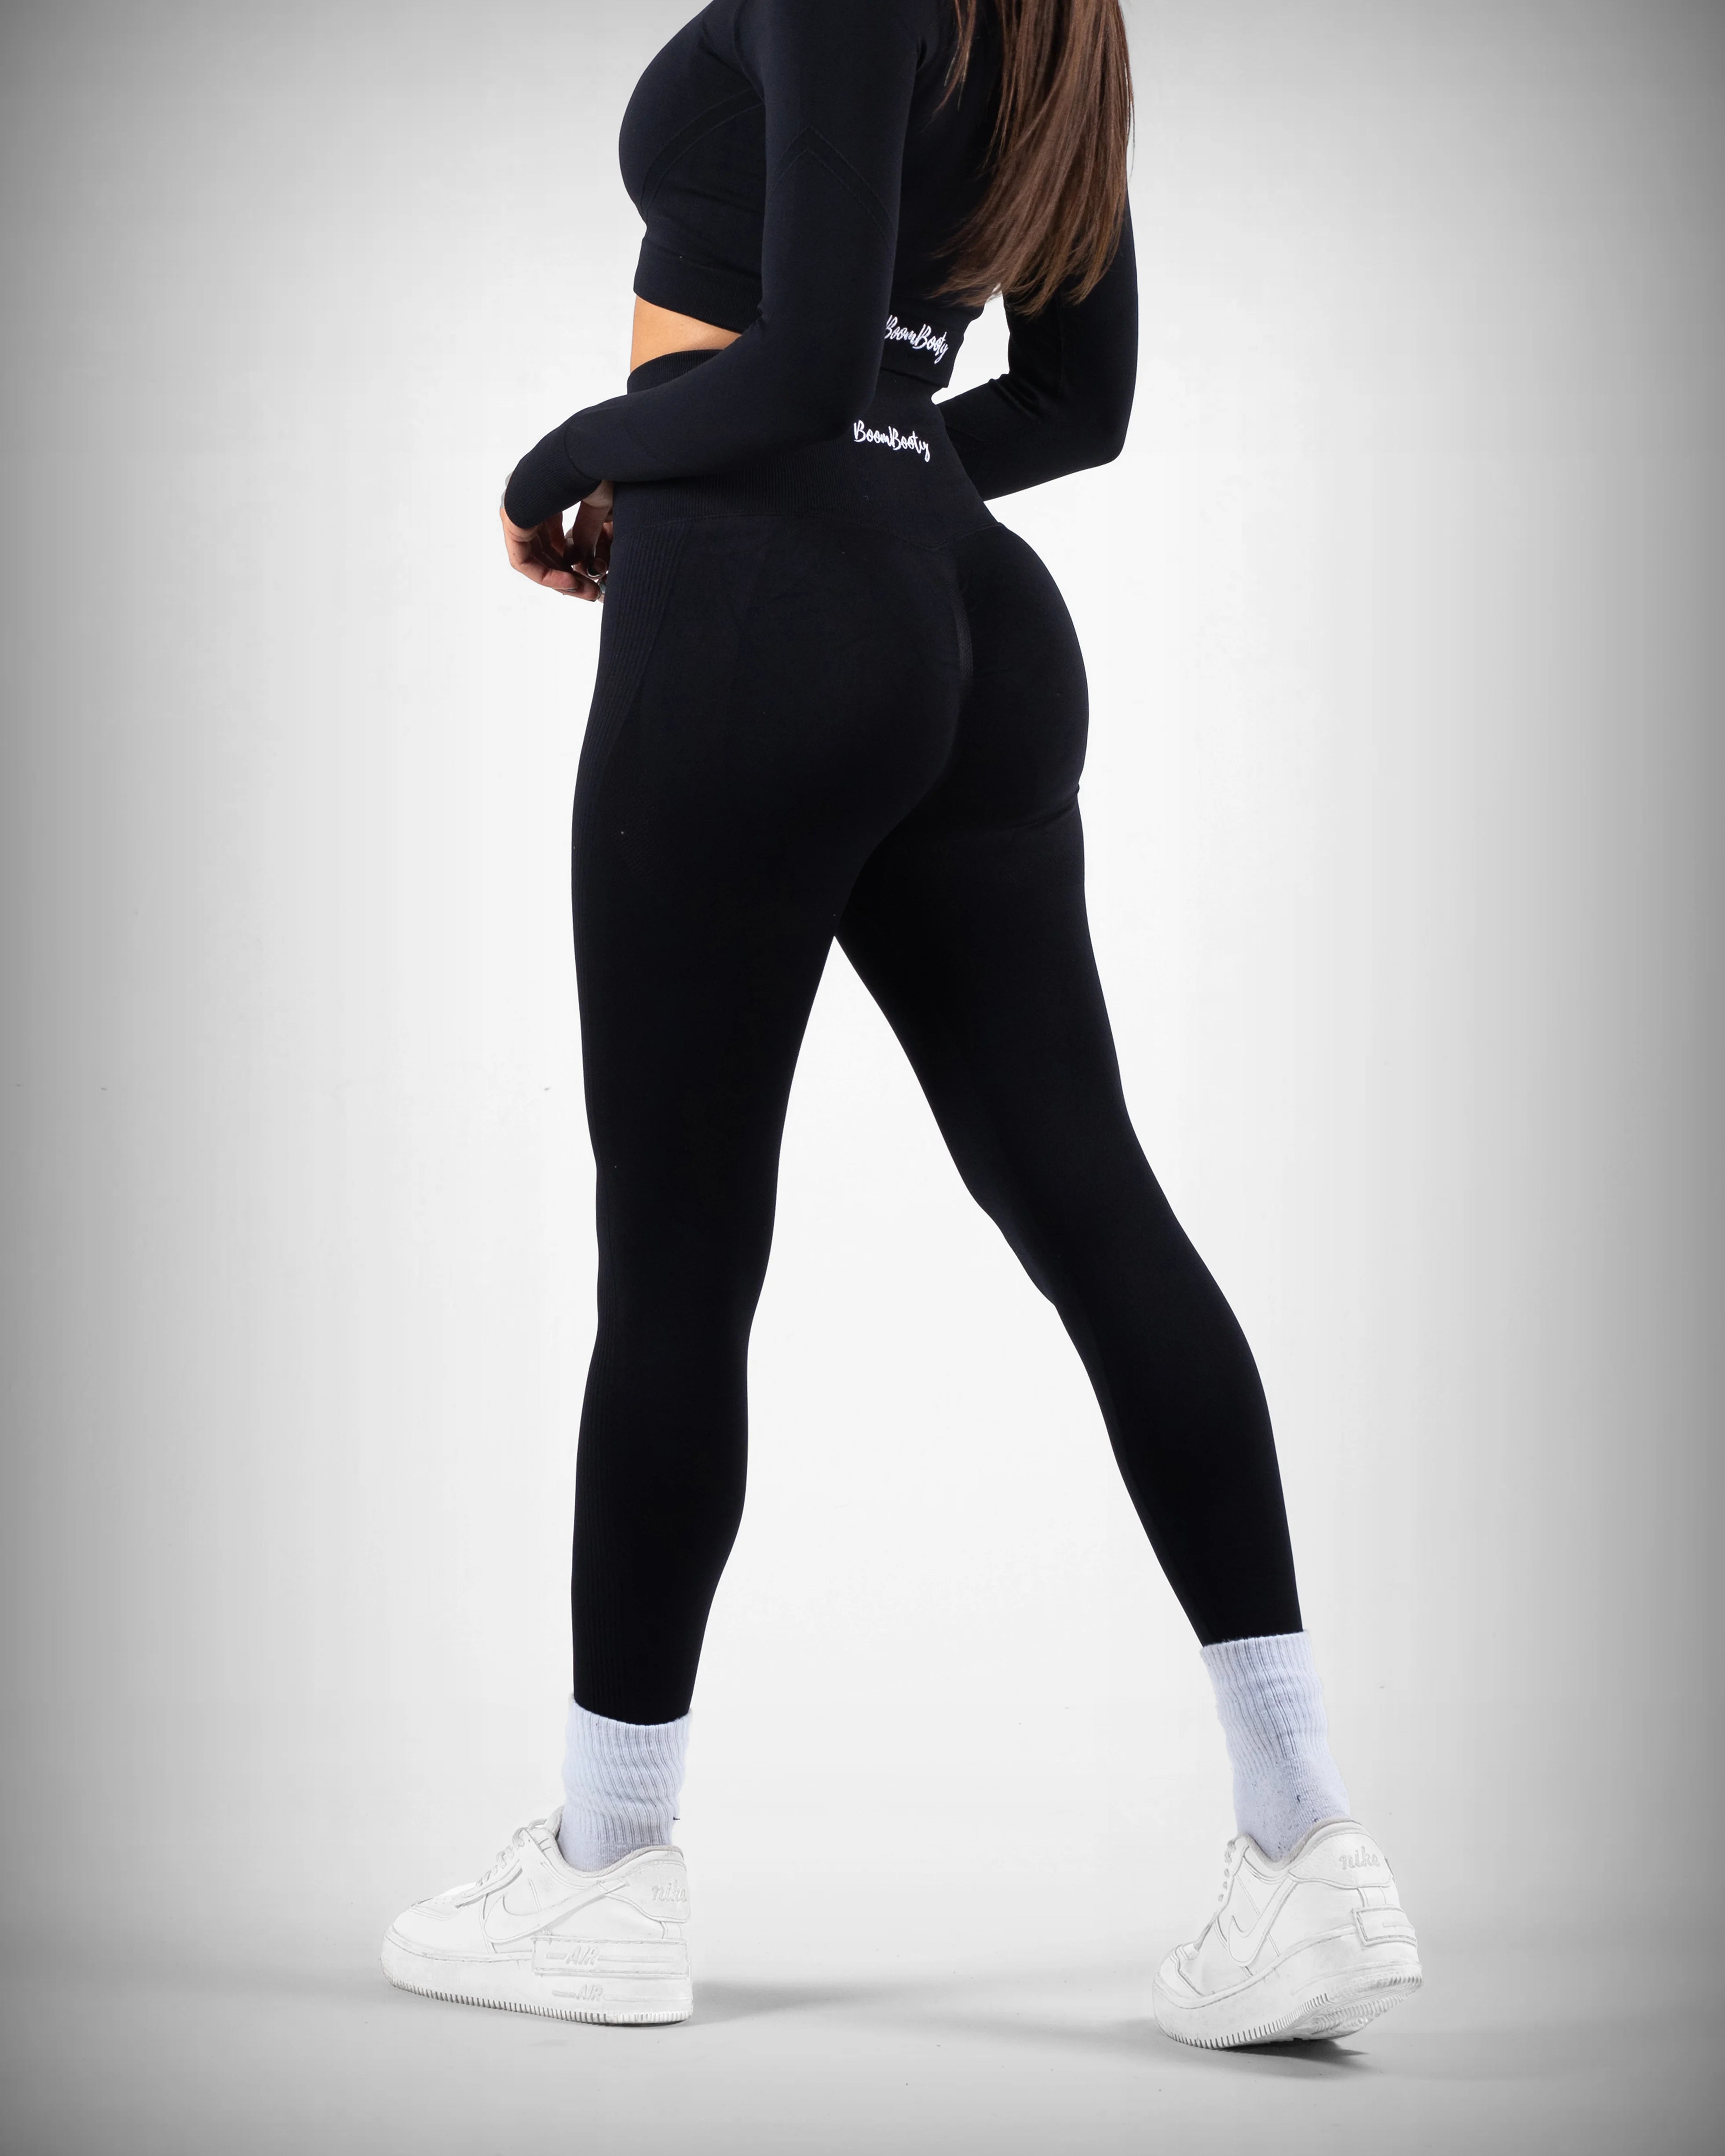 BoomBooty ™ - Push Up Leggings (@boombooty.de)'s videos with you want  me.crickets - isabella 🥸